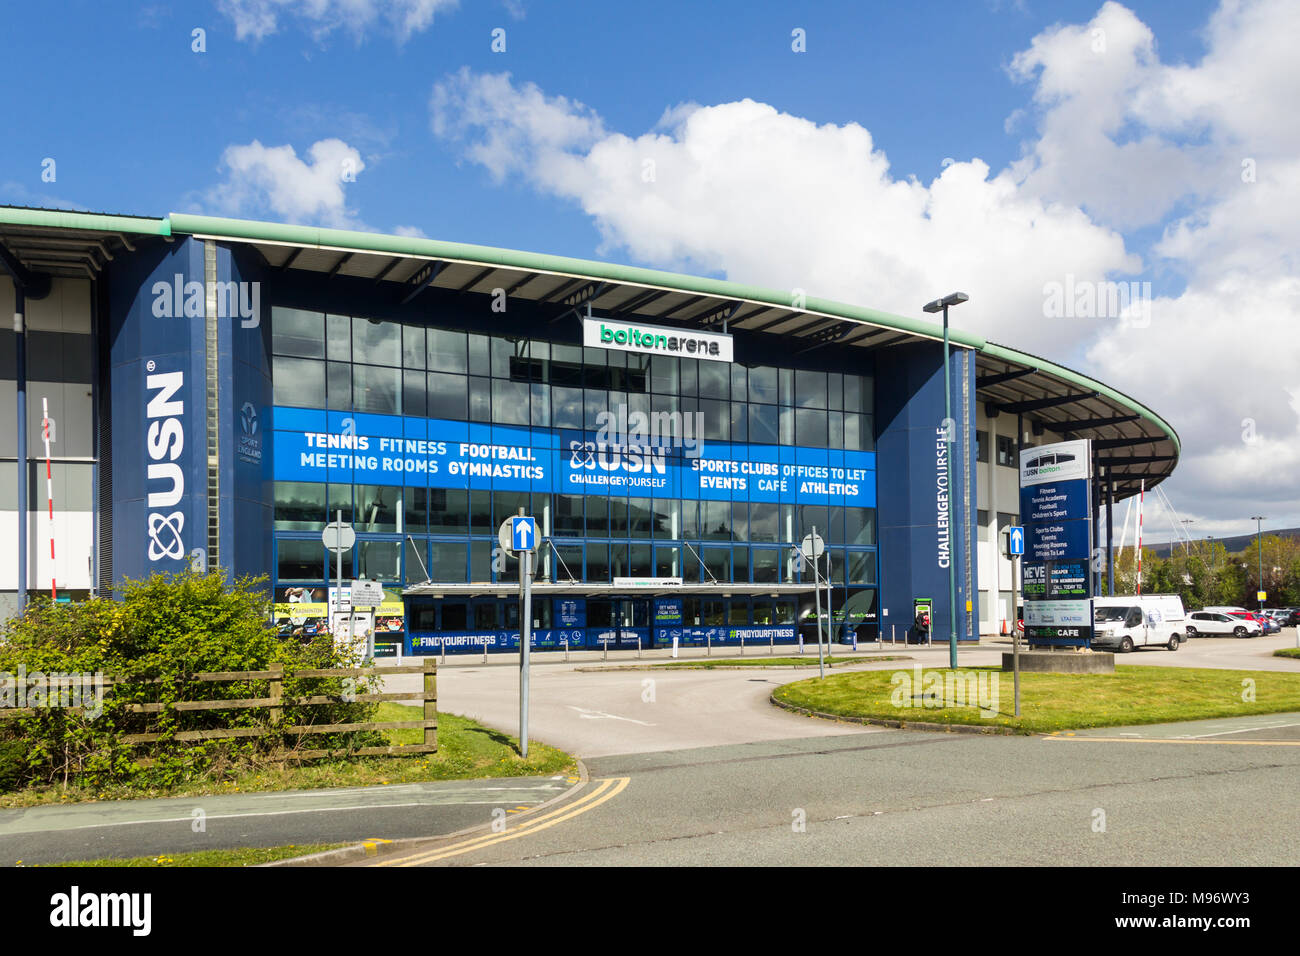 Bolton Arena indoor sports arena at Middlebrook Retail and Leisure Park, Horwich. The facility includes fitness gyms, tennis and football facilities.  Stock Photo